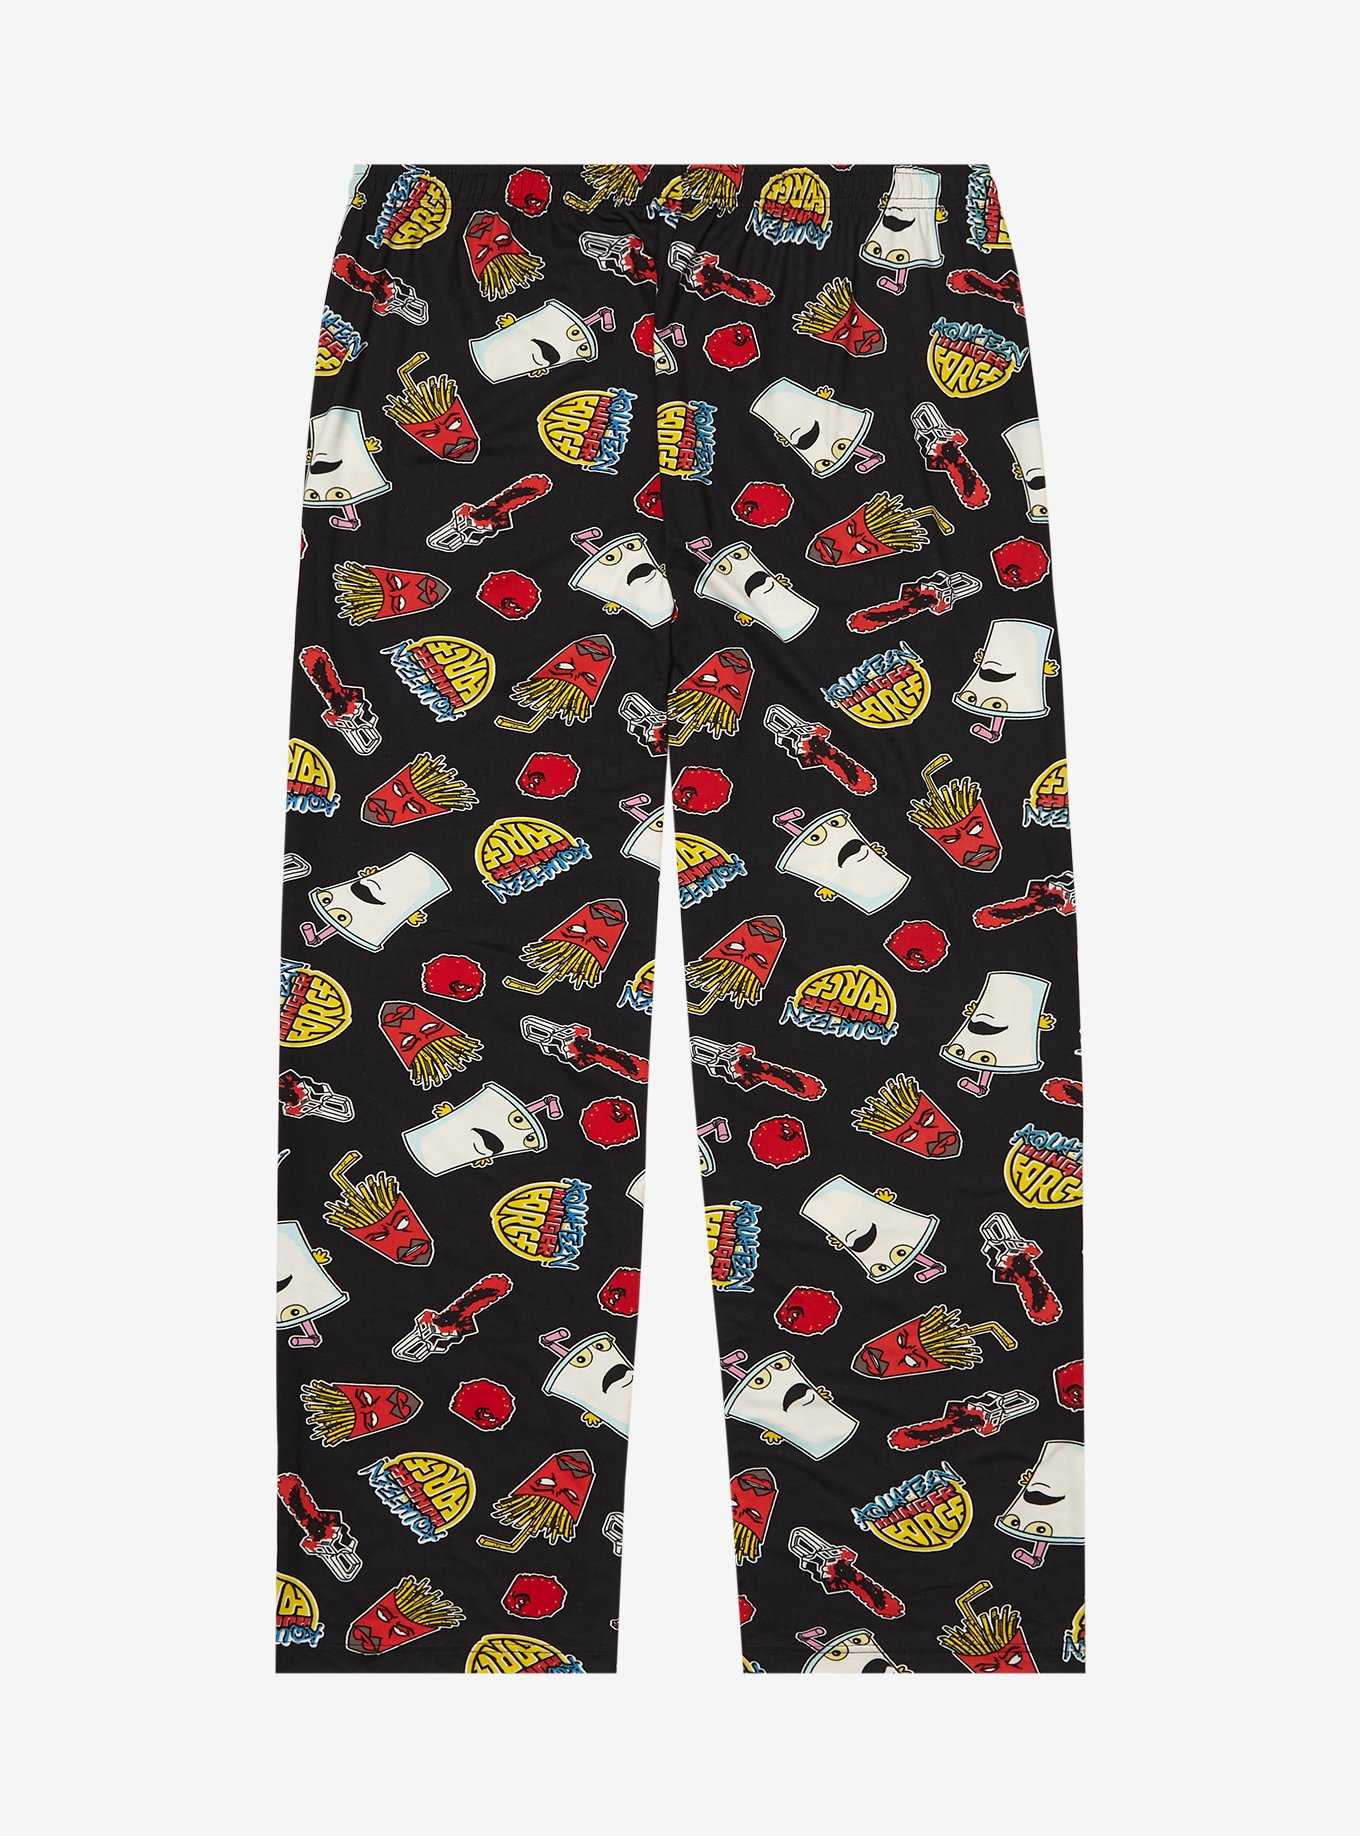 Aqua Teen Hunger Force Allover Print Women's Plus Size Sleep Pants - BoxLunch Exclusive, , hi-res